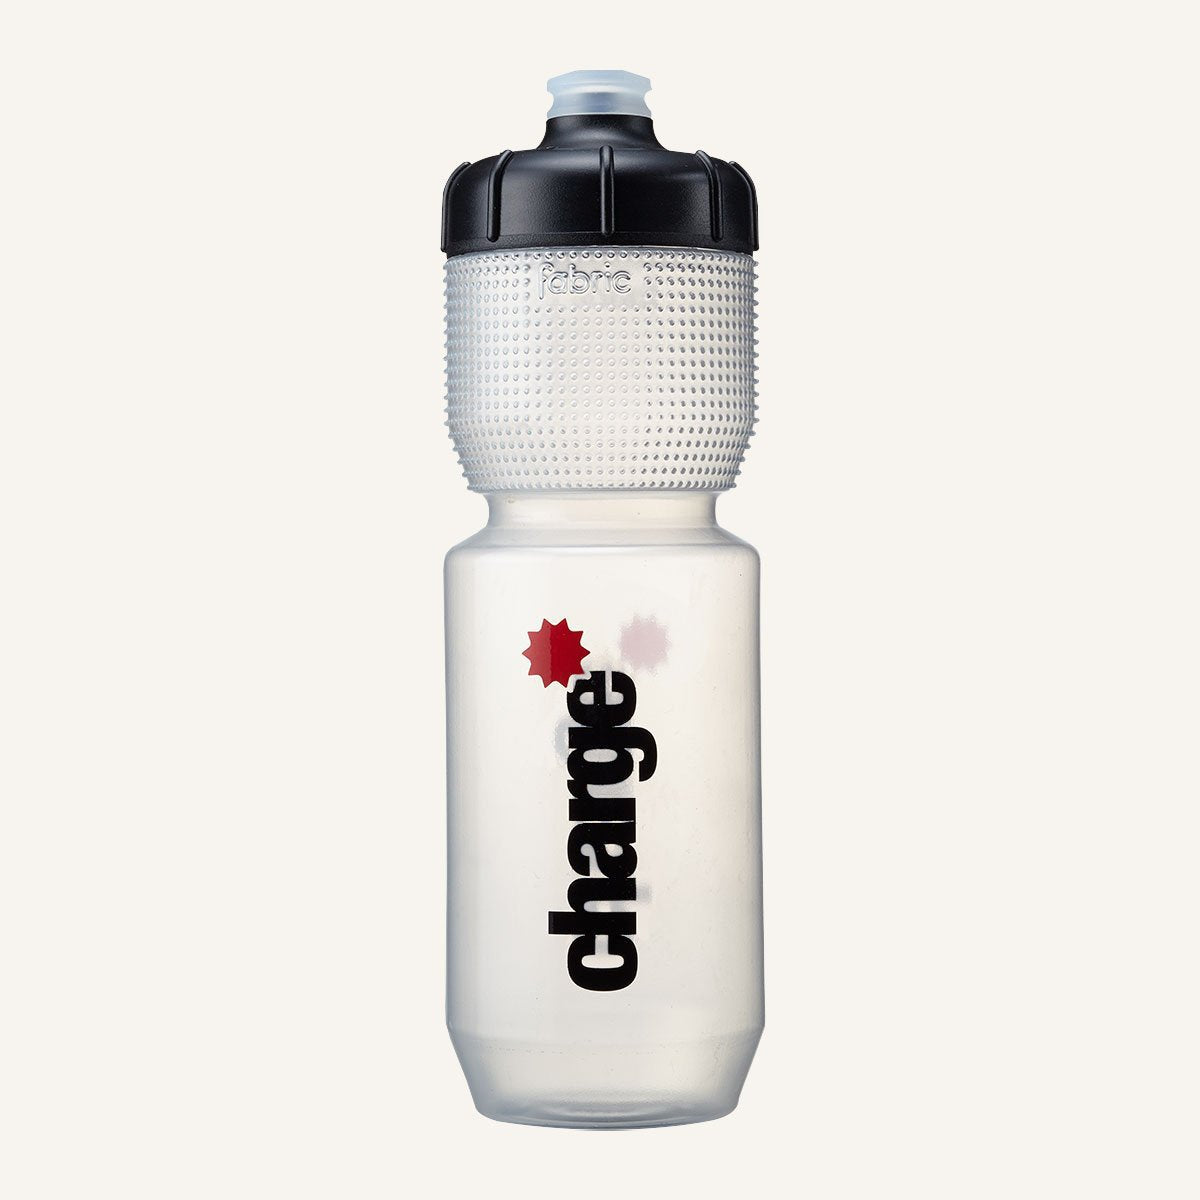 Higher Quality, Durable Felt Bicycles Accessories WATER BOTTLE